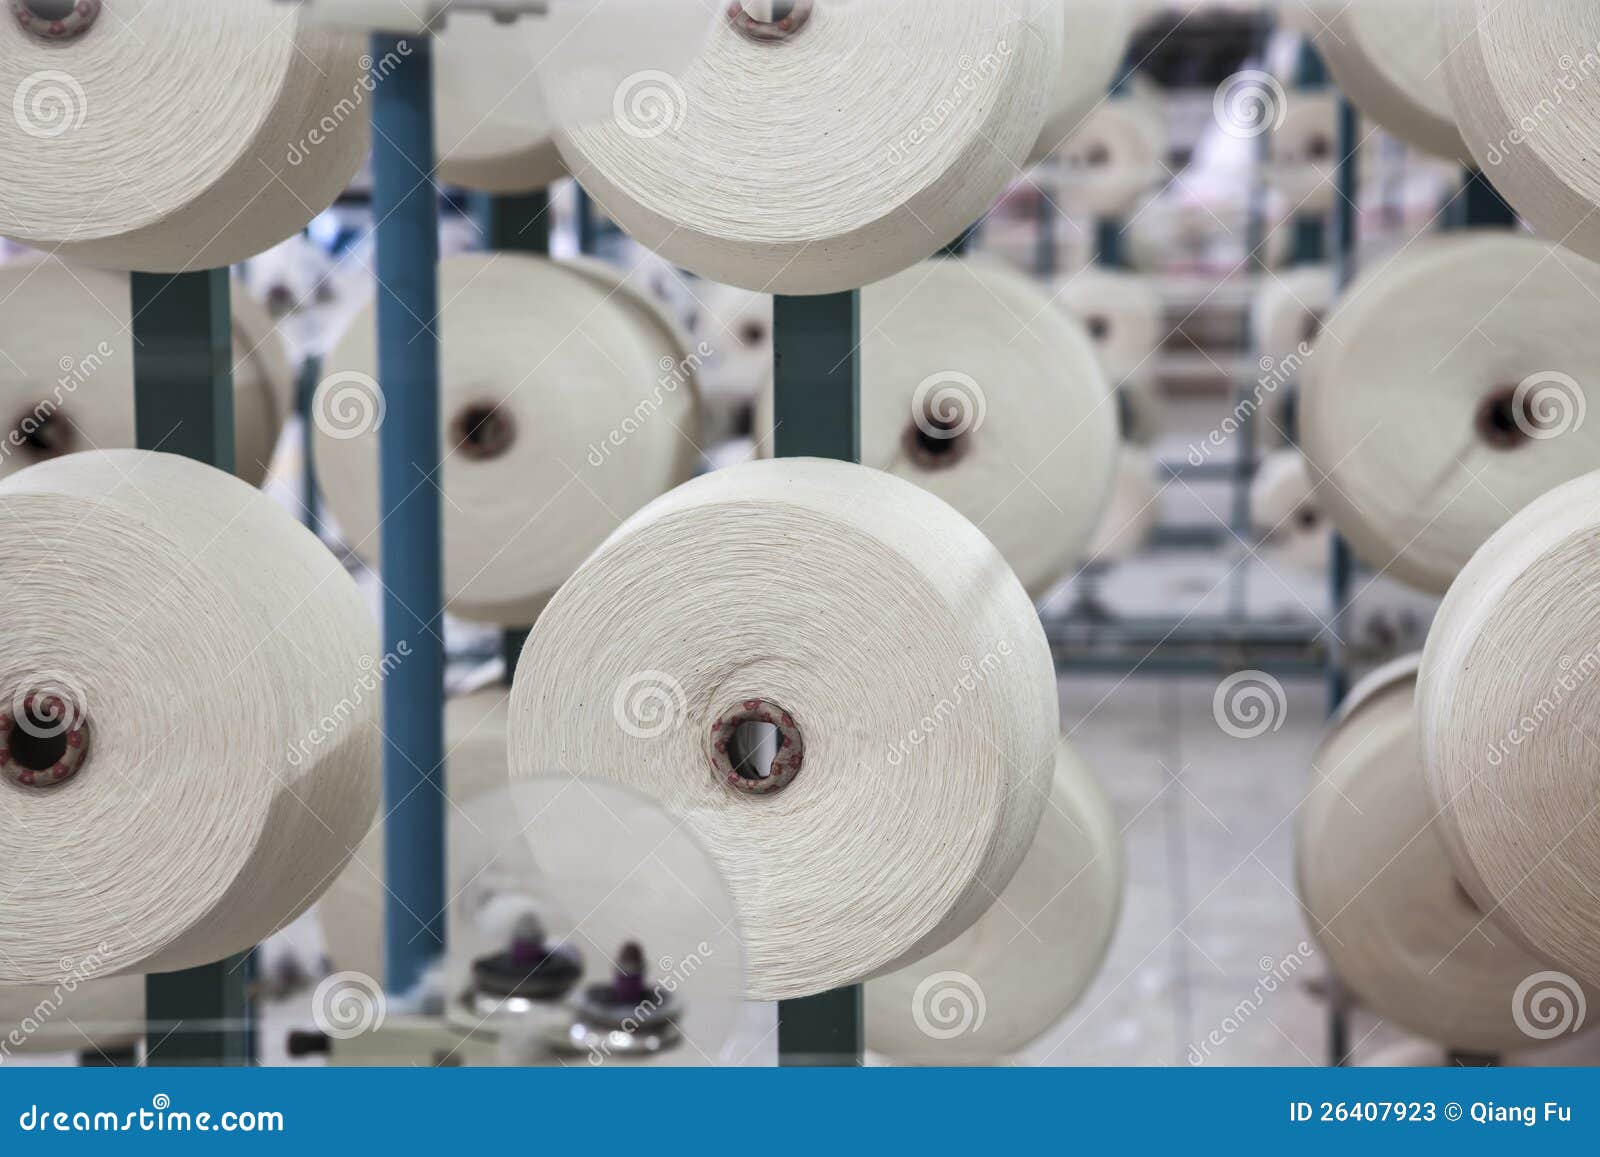 Cotton thread reel stock image. Image of craft, textile - 26407923